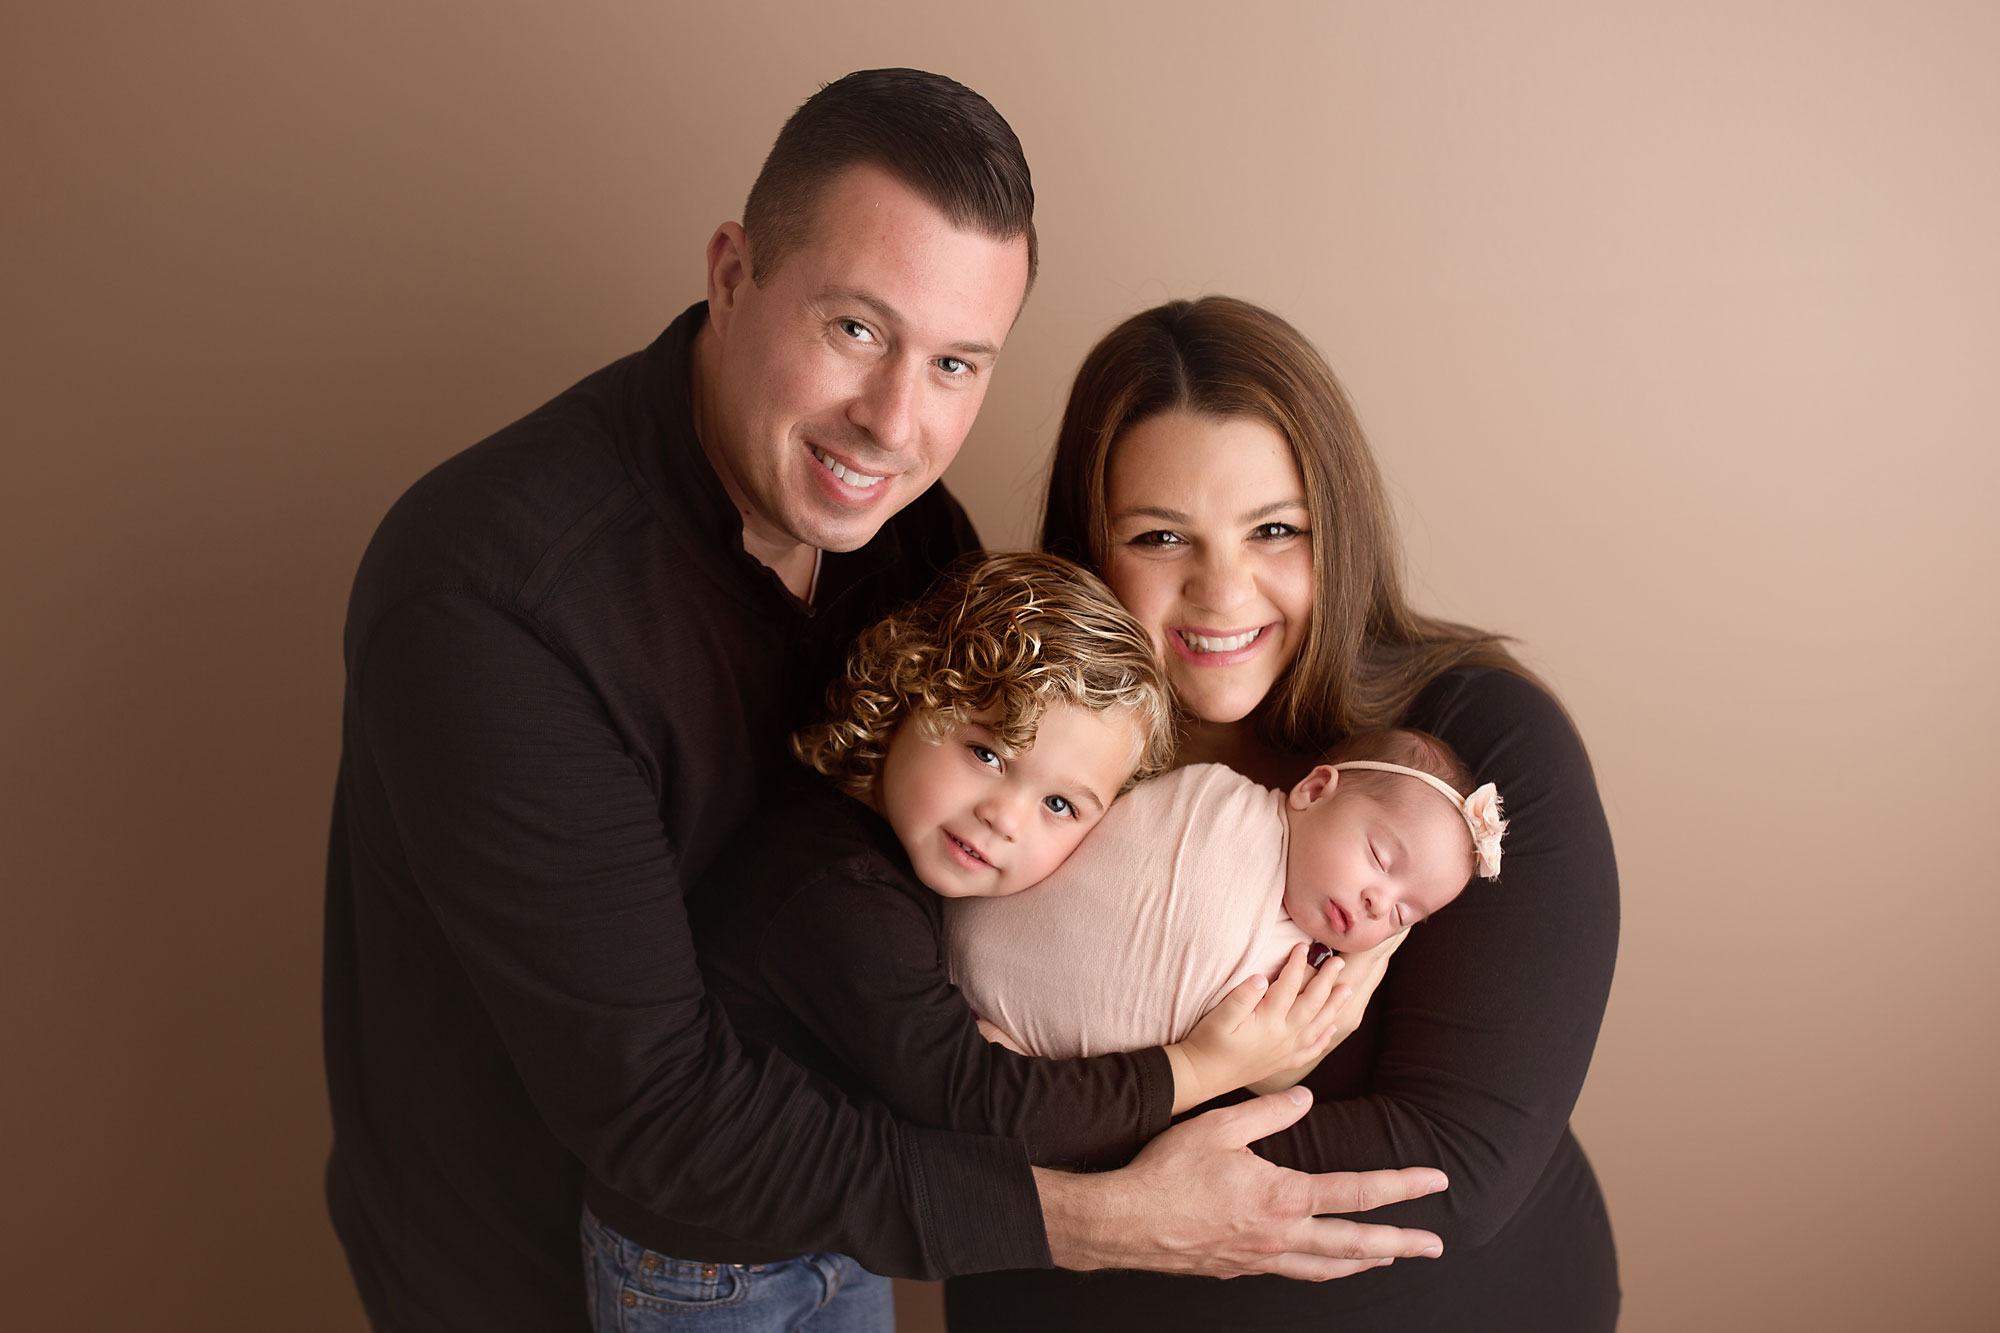 new jersey family portrait, parents and big brother holding newborn baby girl